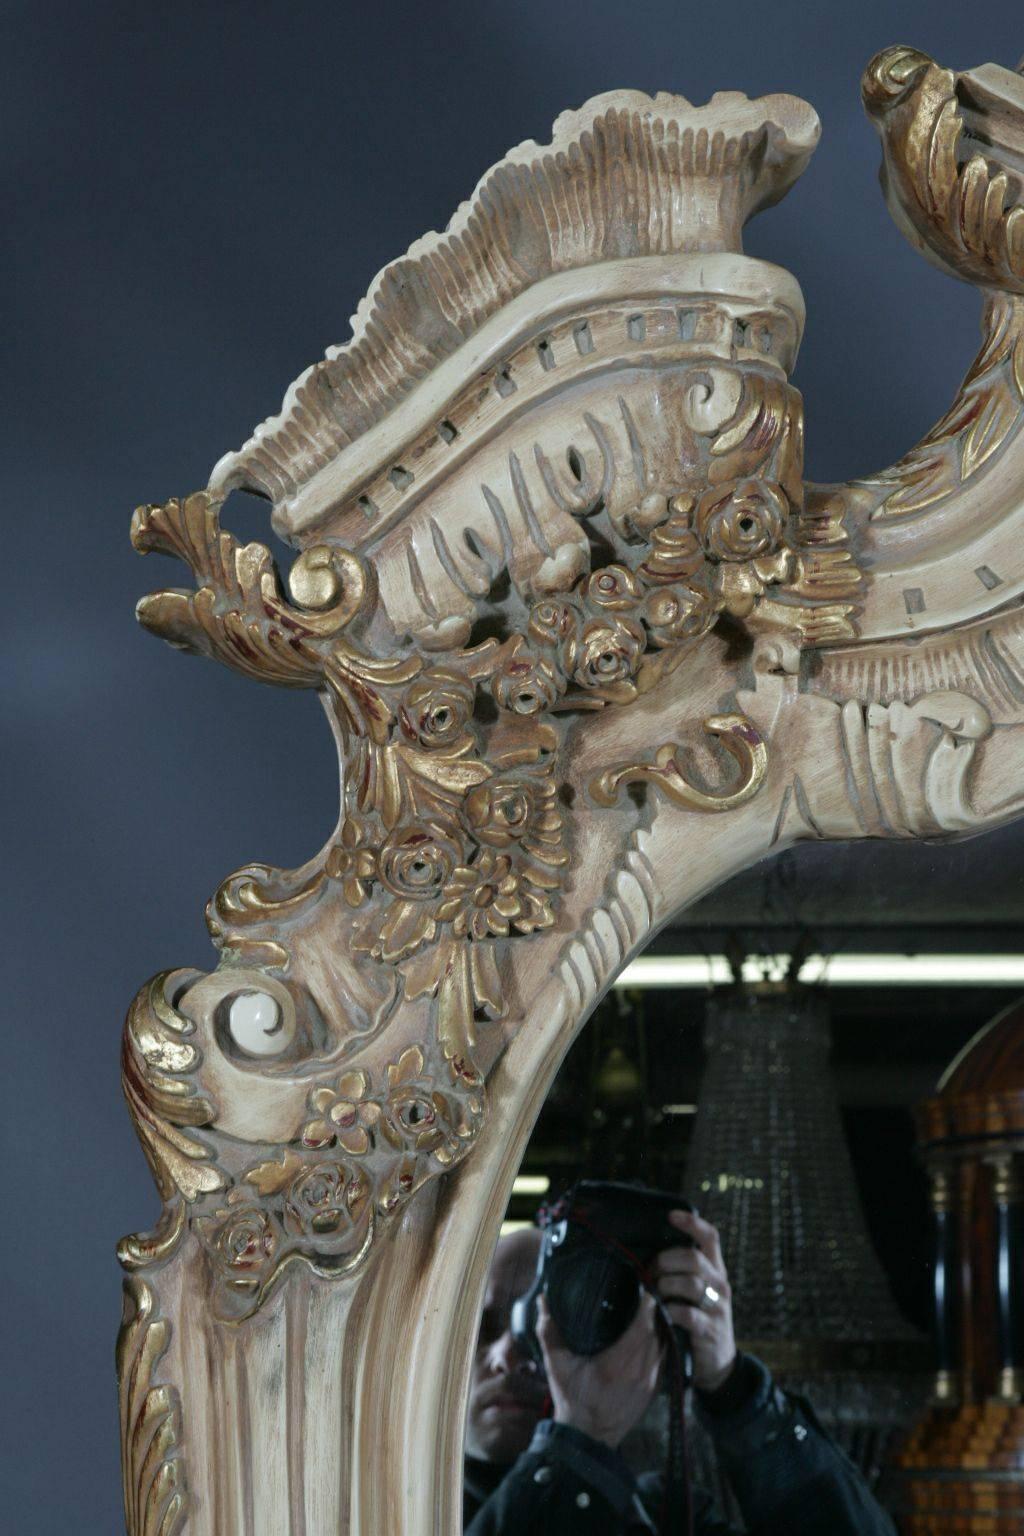 20th Century Louis XV Style Standing Mirror
Monumental astrocratic standing mirror in Louis XV style
Solid beechwood, finely carved, colored hand-painted and gilded. Elaborately carved and strongly curved frame closure. Rich gable-styled broken